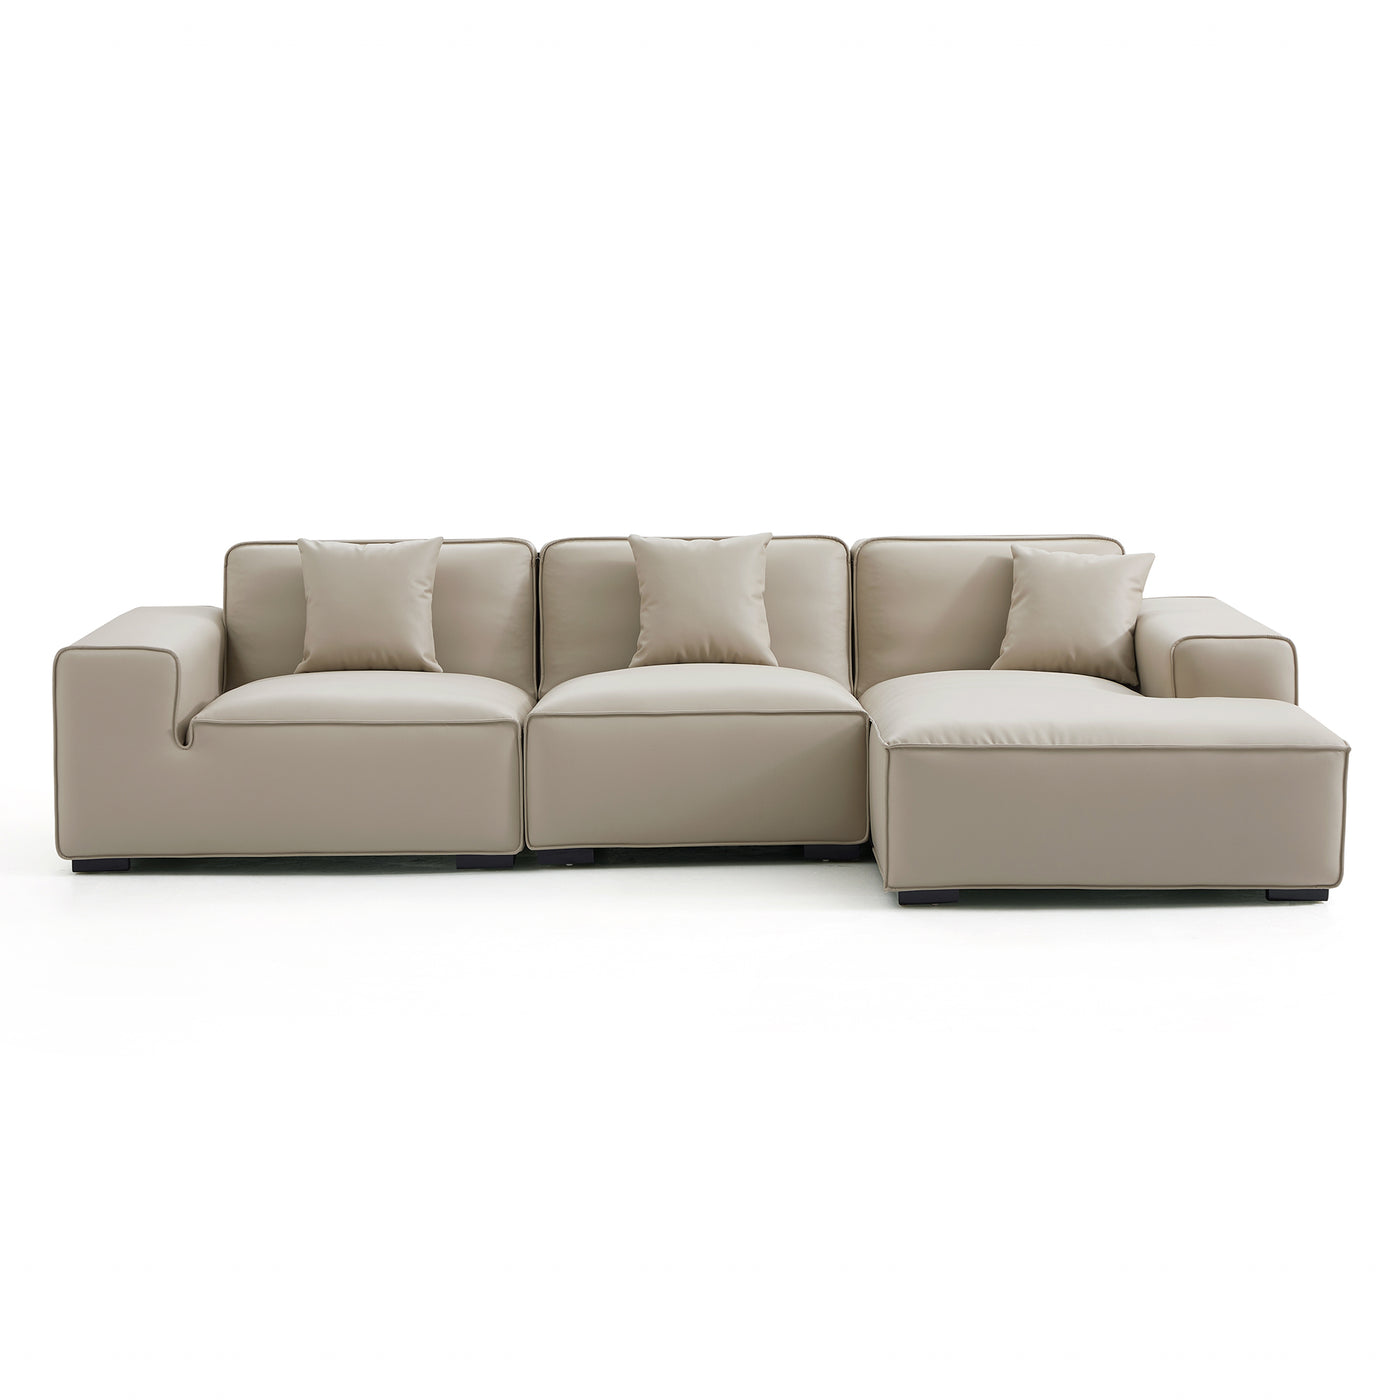 Domus Modular Black Leather Sectional Sofa-Beige-126.0"-Facing Right